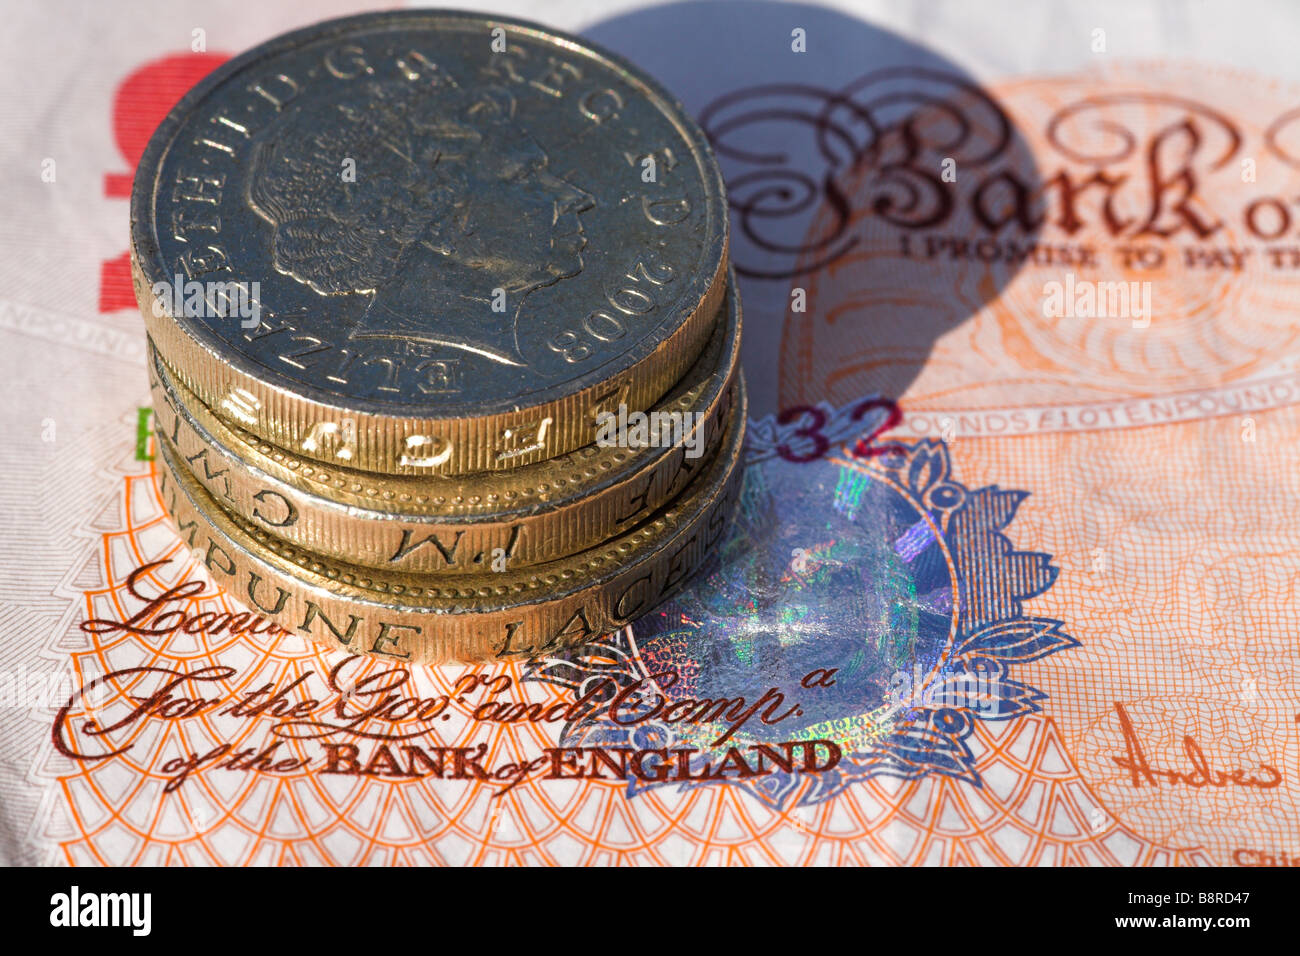 Bank of England banknote with pile of pound coins. Stock Photo